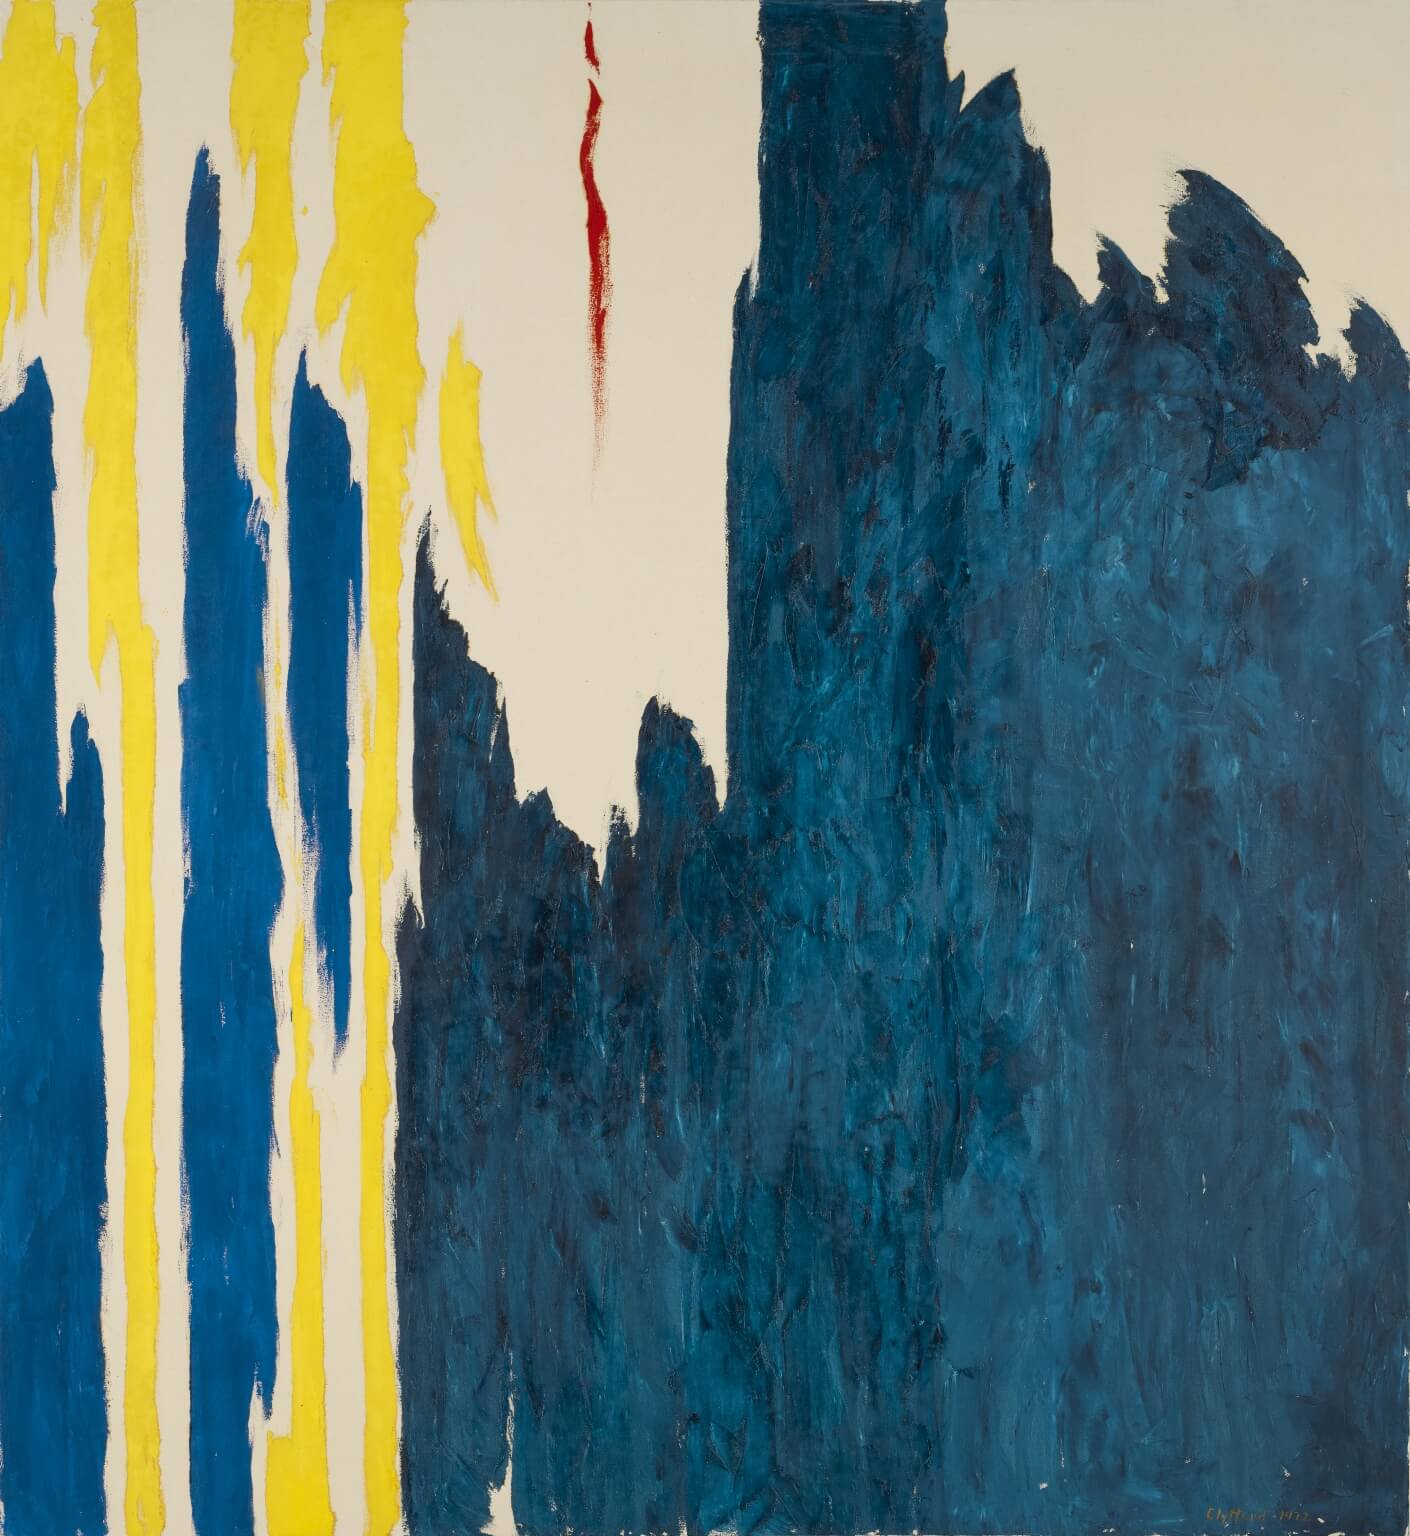 Abstract oil painting with large sections of a dark blue, with some vertical yellow figures, bare canvas, and some hints of orange-red